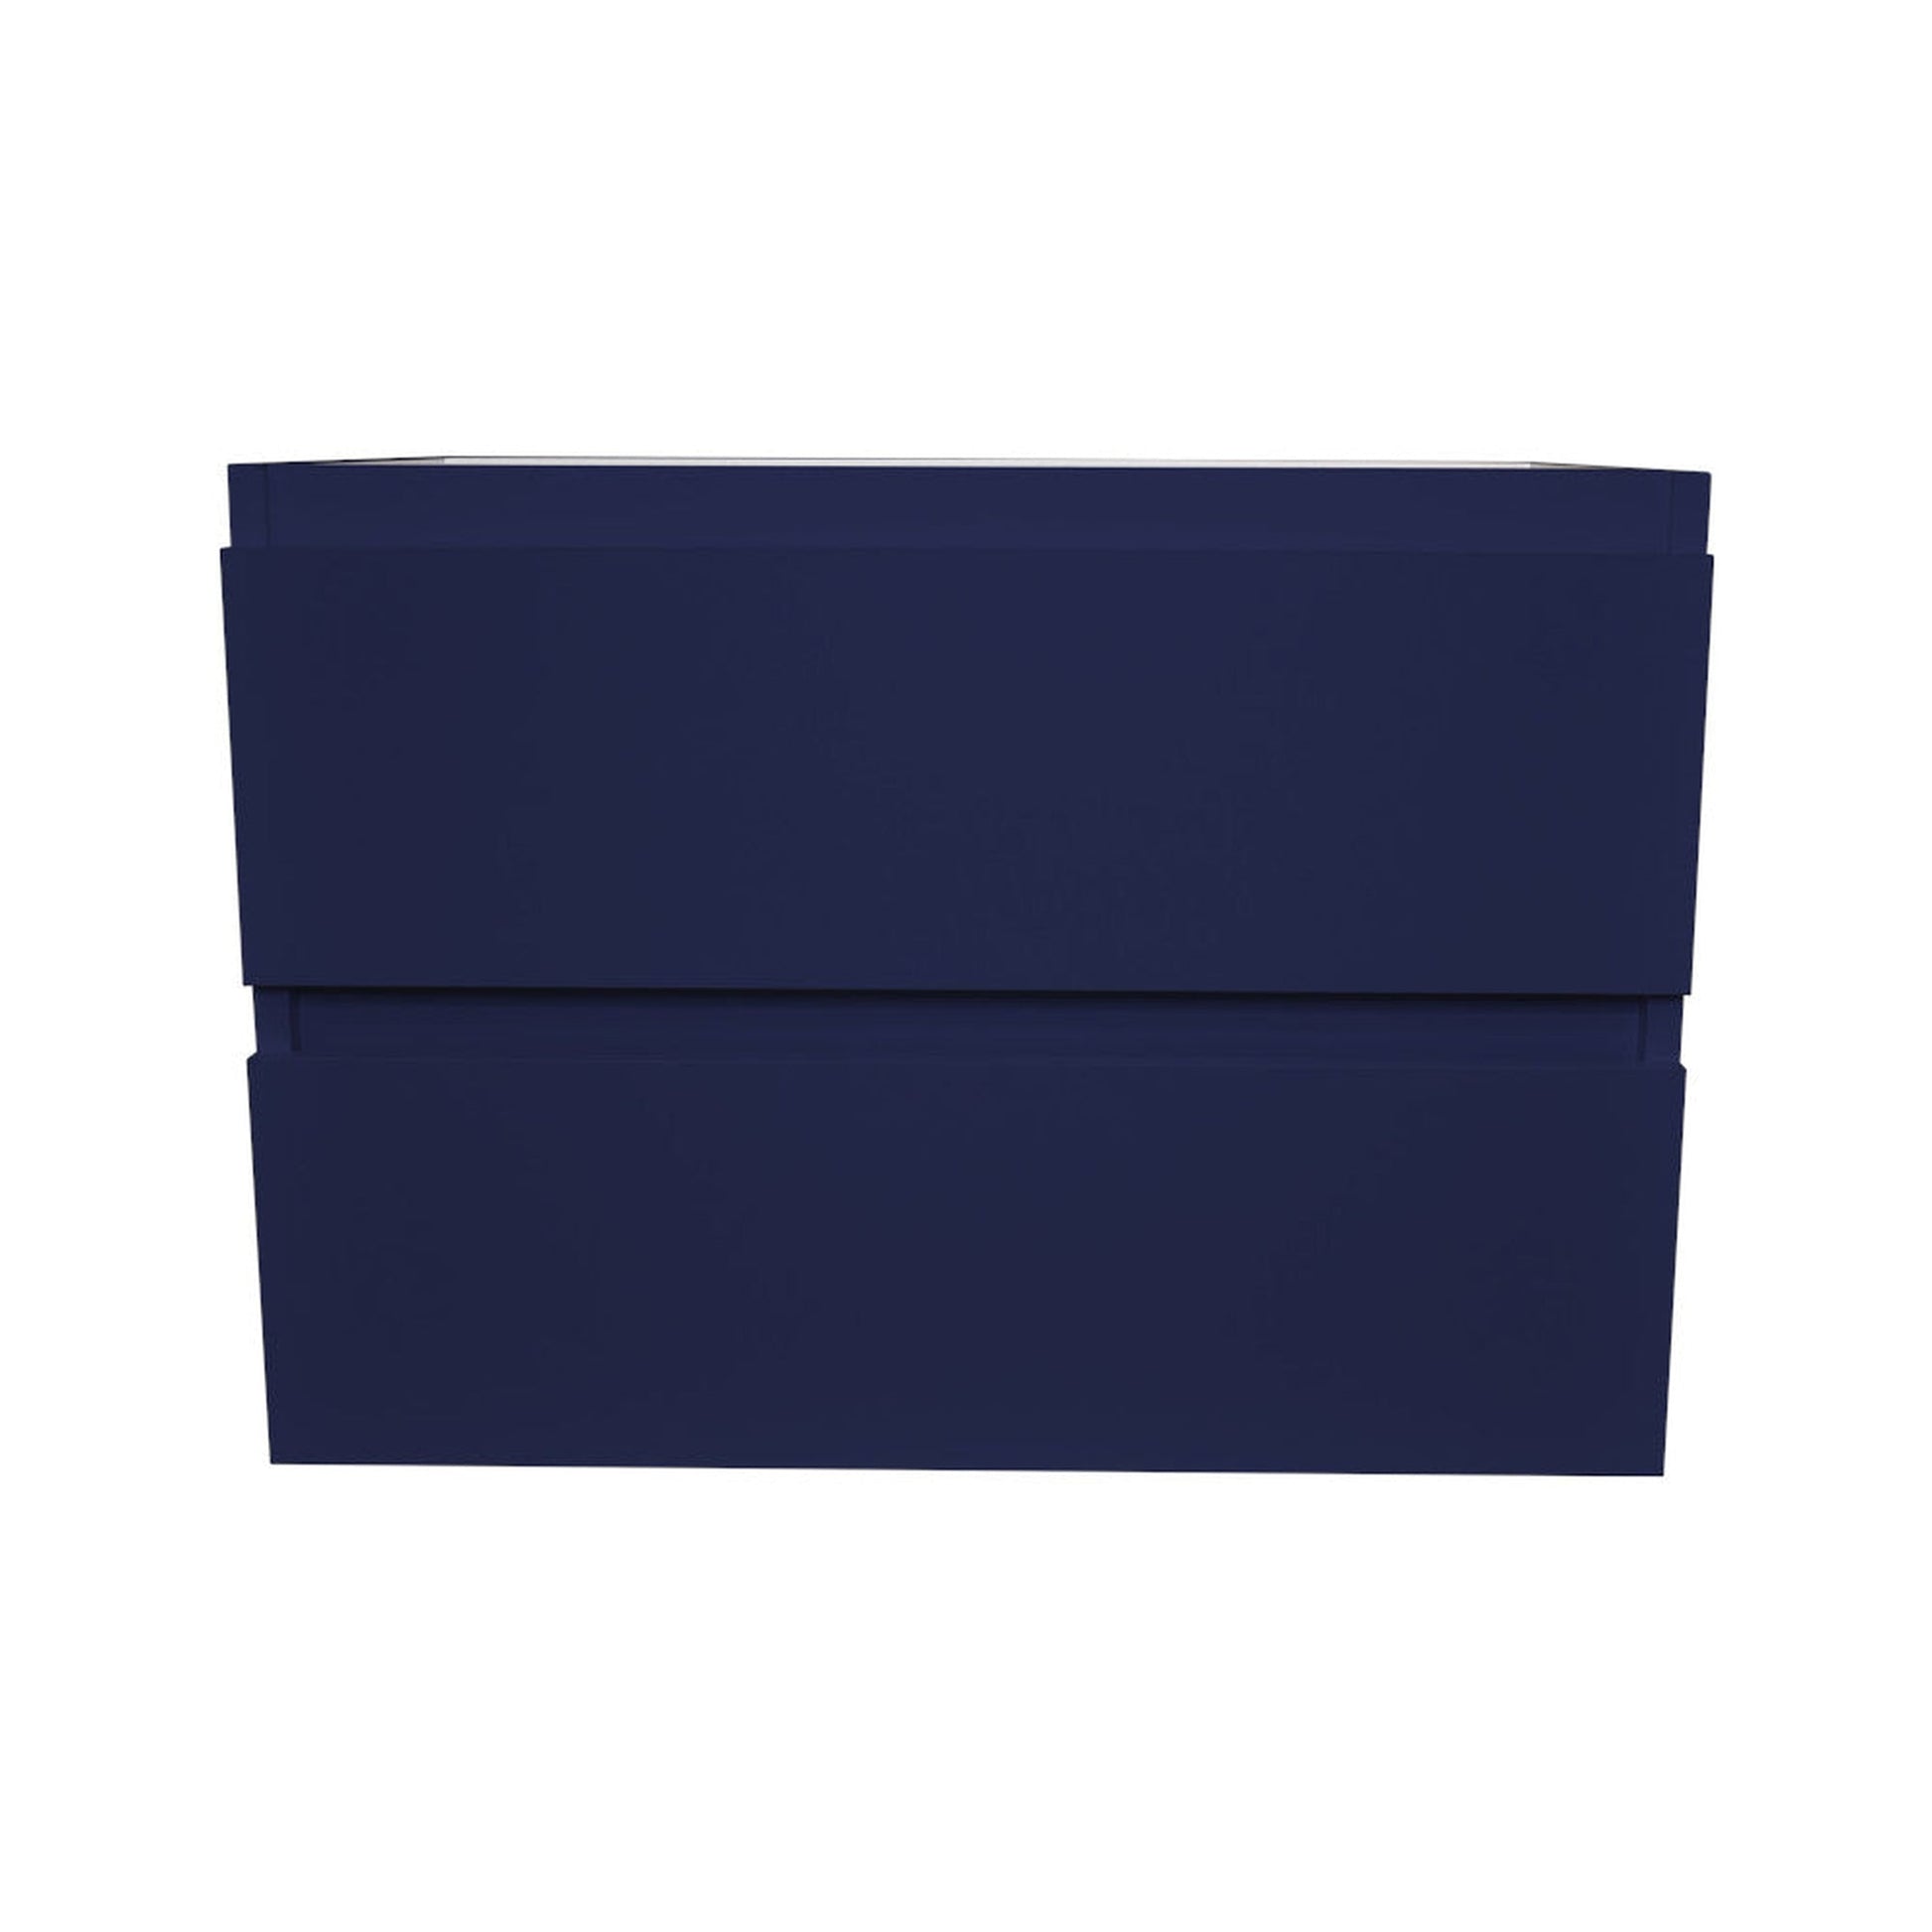 Volpa USA Salt 24" x 20" Navy Wall-Mounted Floating Bathroom Vanity Cabinet with Drawers